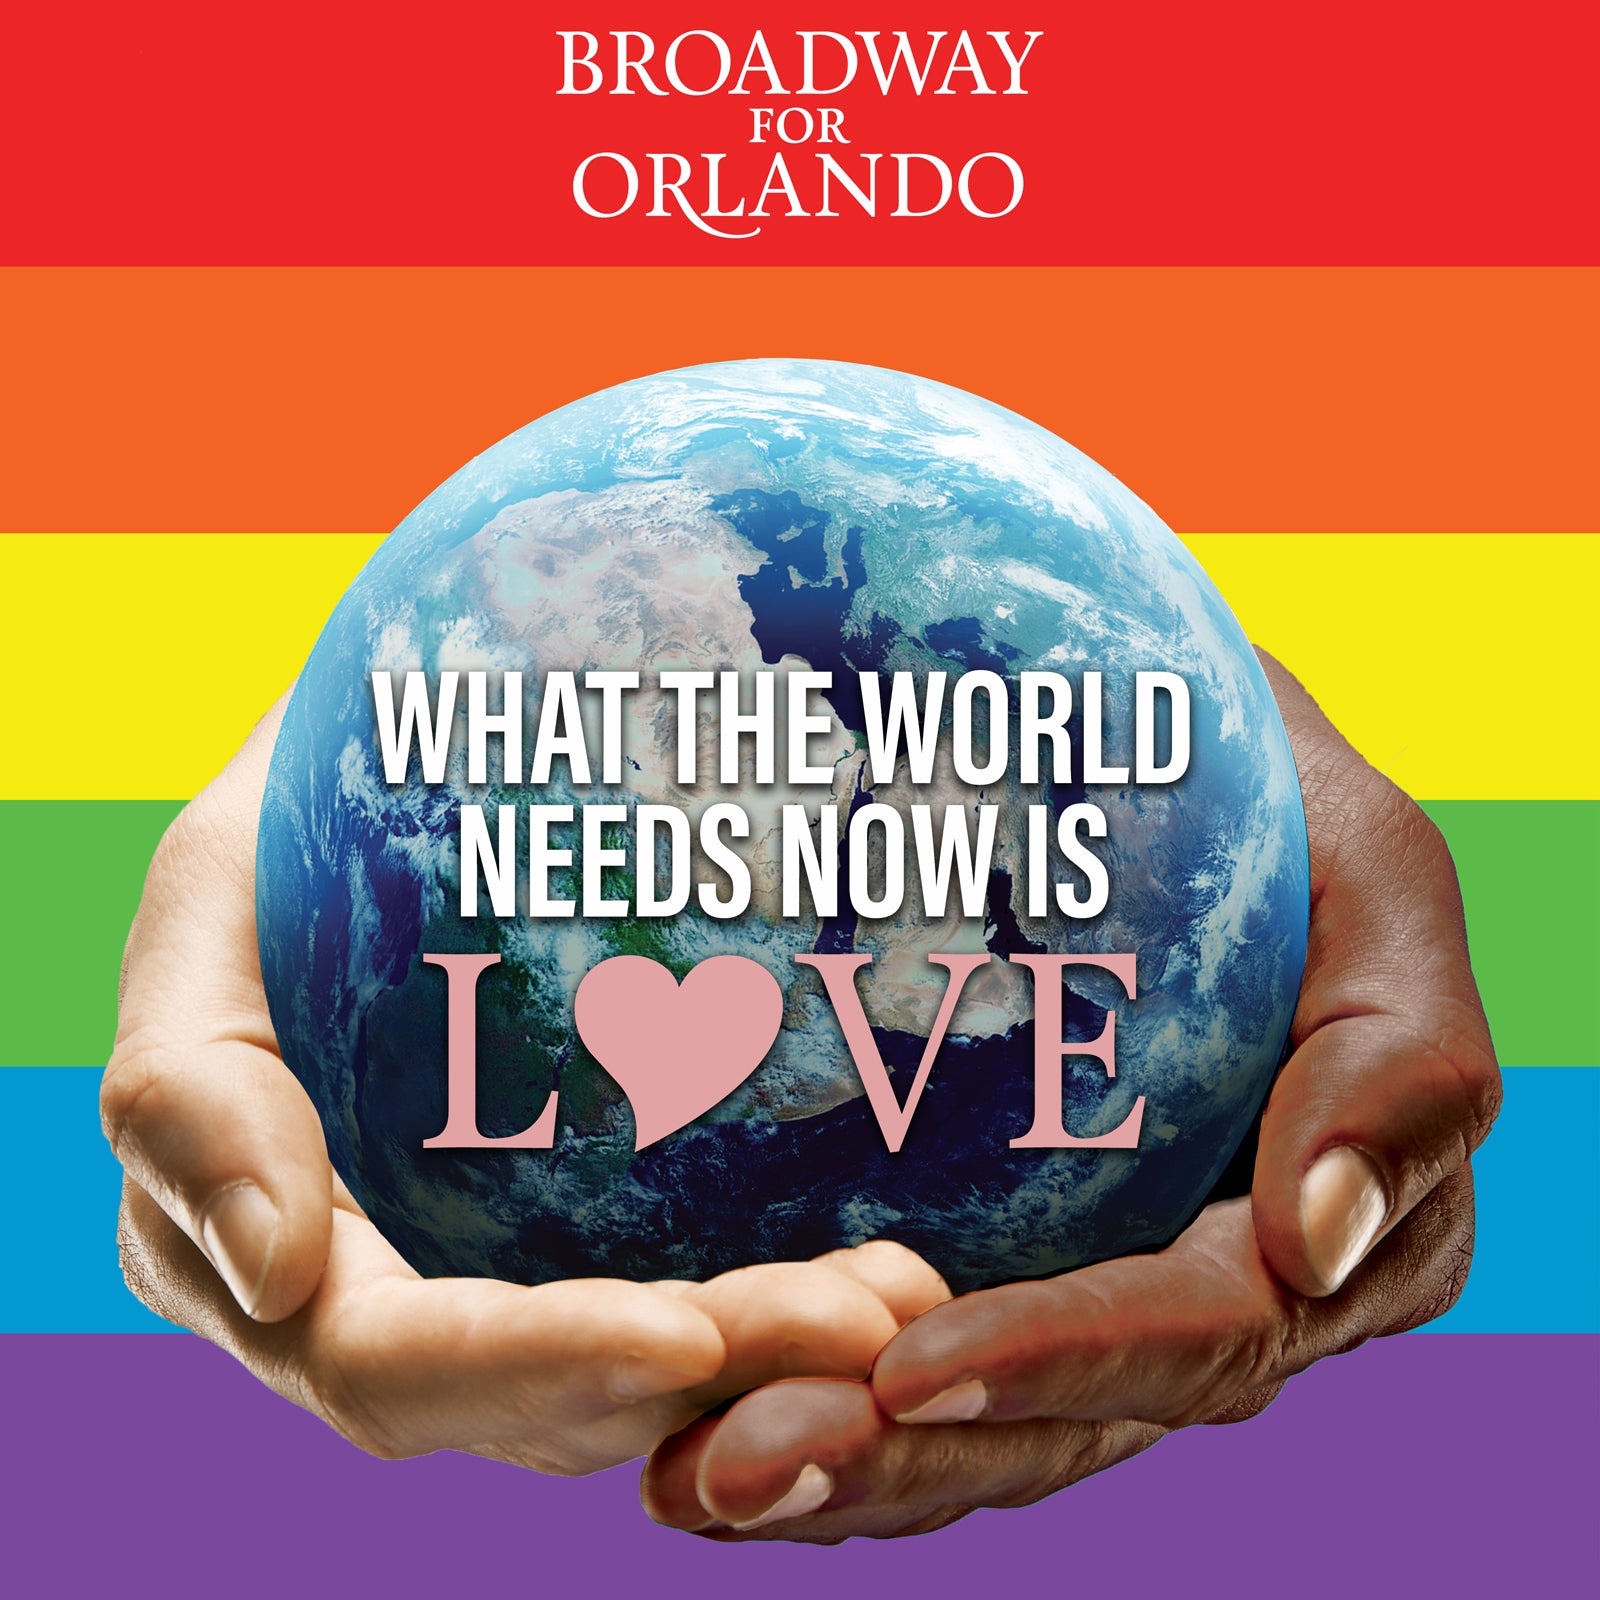 Broadway For Orlando: What the World Needs Now is Love [Limited Edition CD]